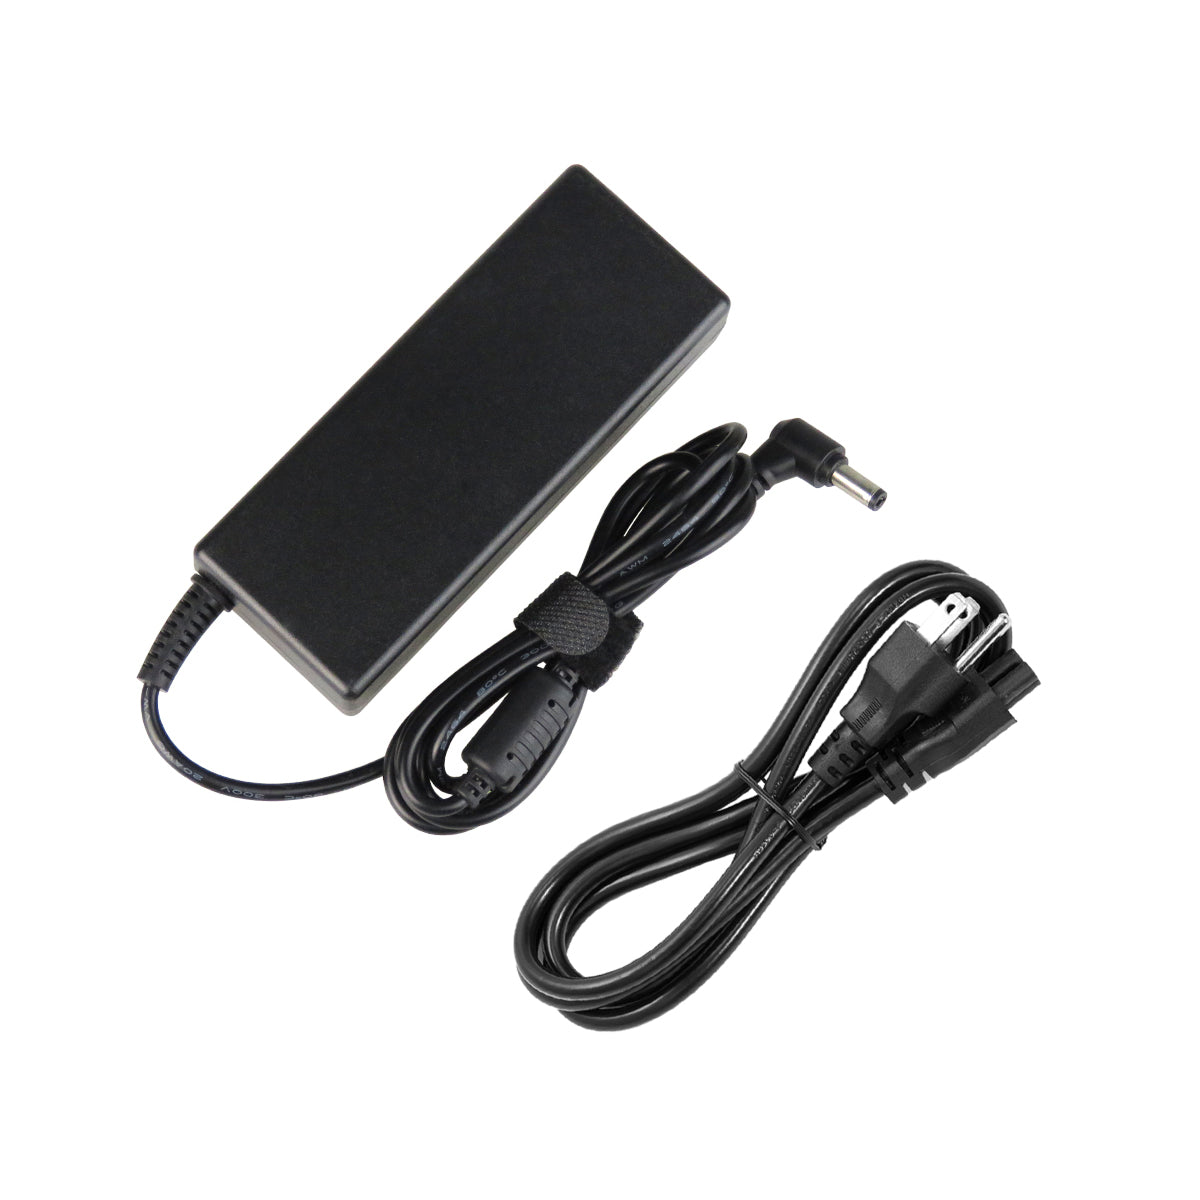 AC Adapter Charger for ASUS B50A Notebook.